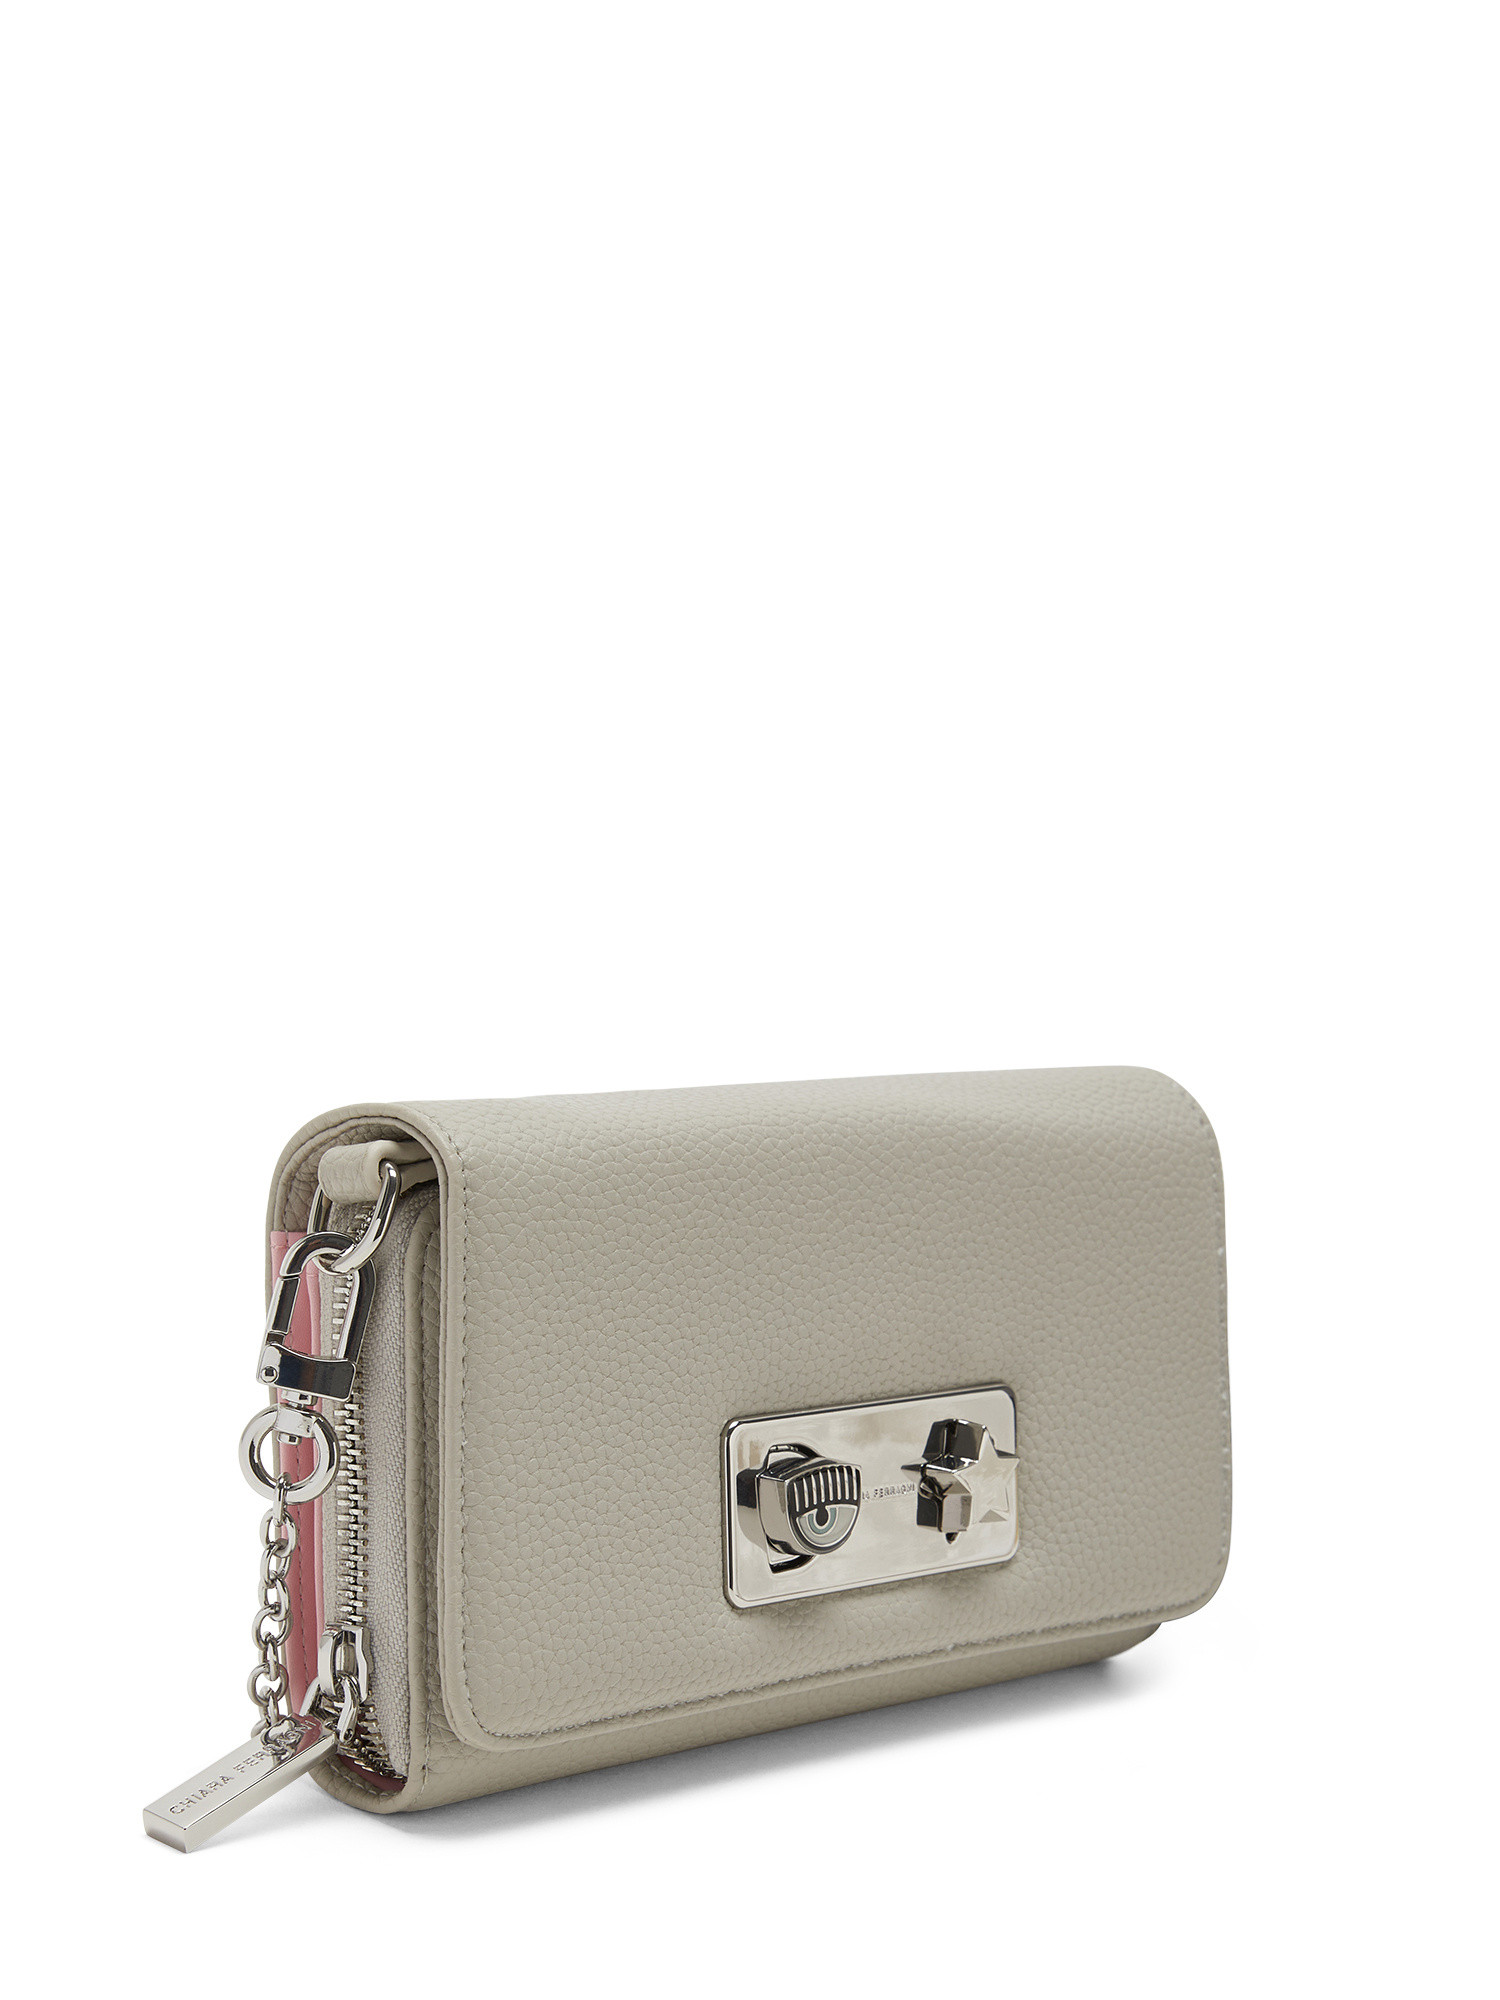 Chiara Ferragni - Clutch bag with logo, TAUPE, large image number 1